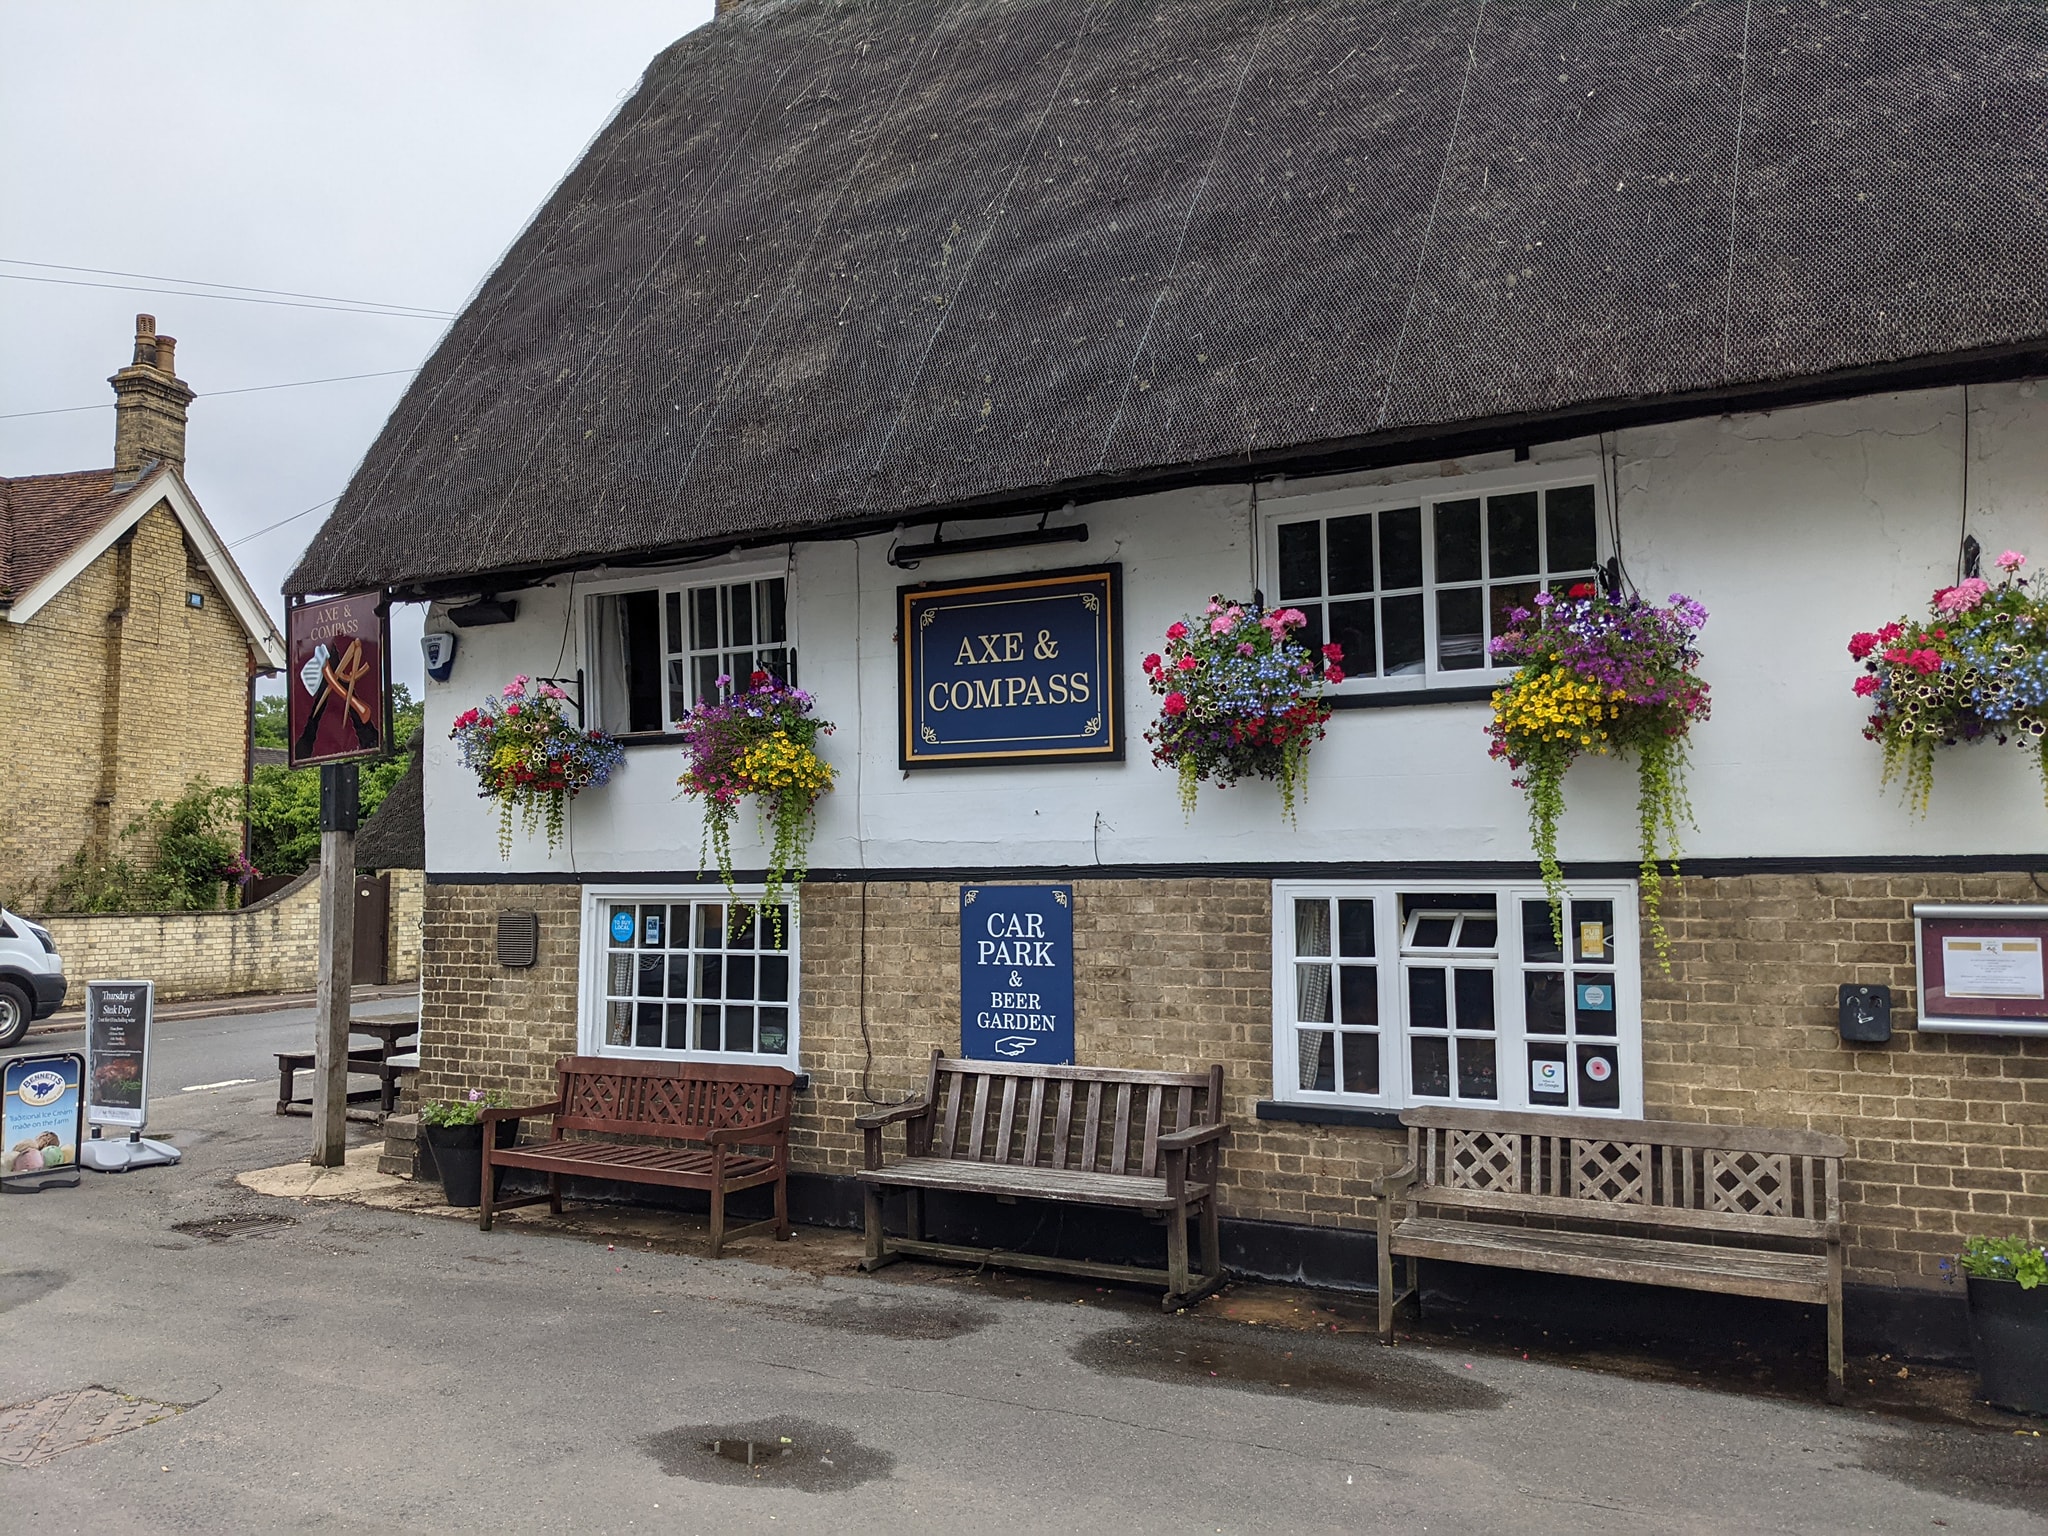 The Axe & Compass in Hemingford